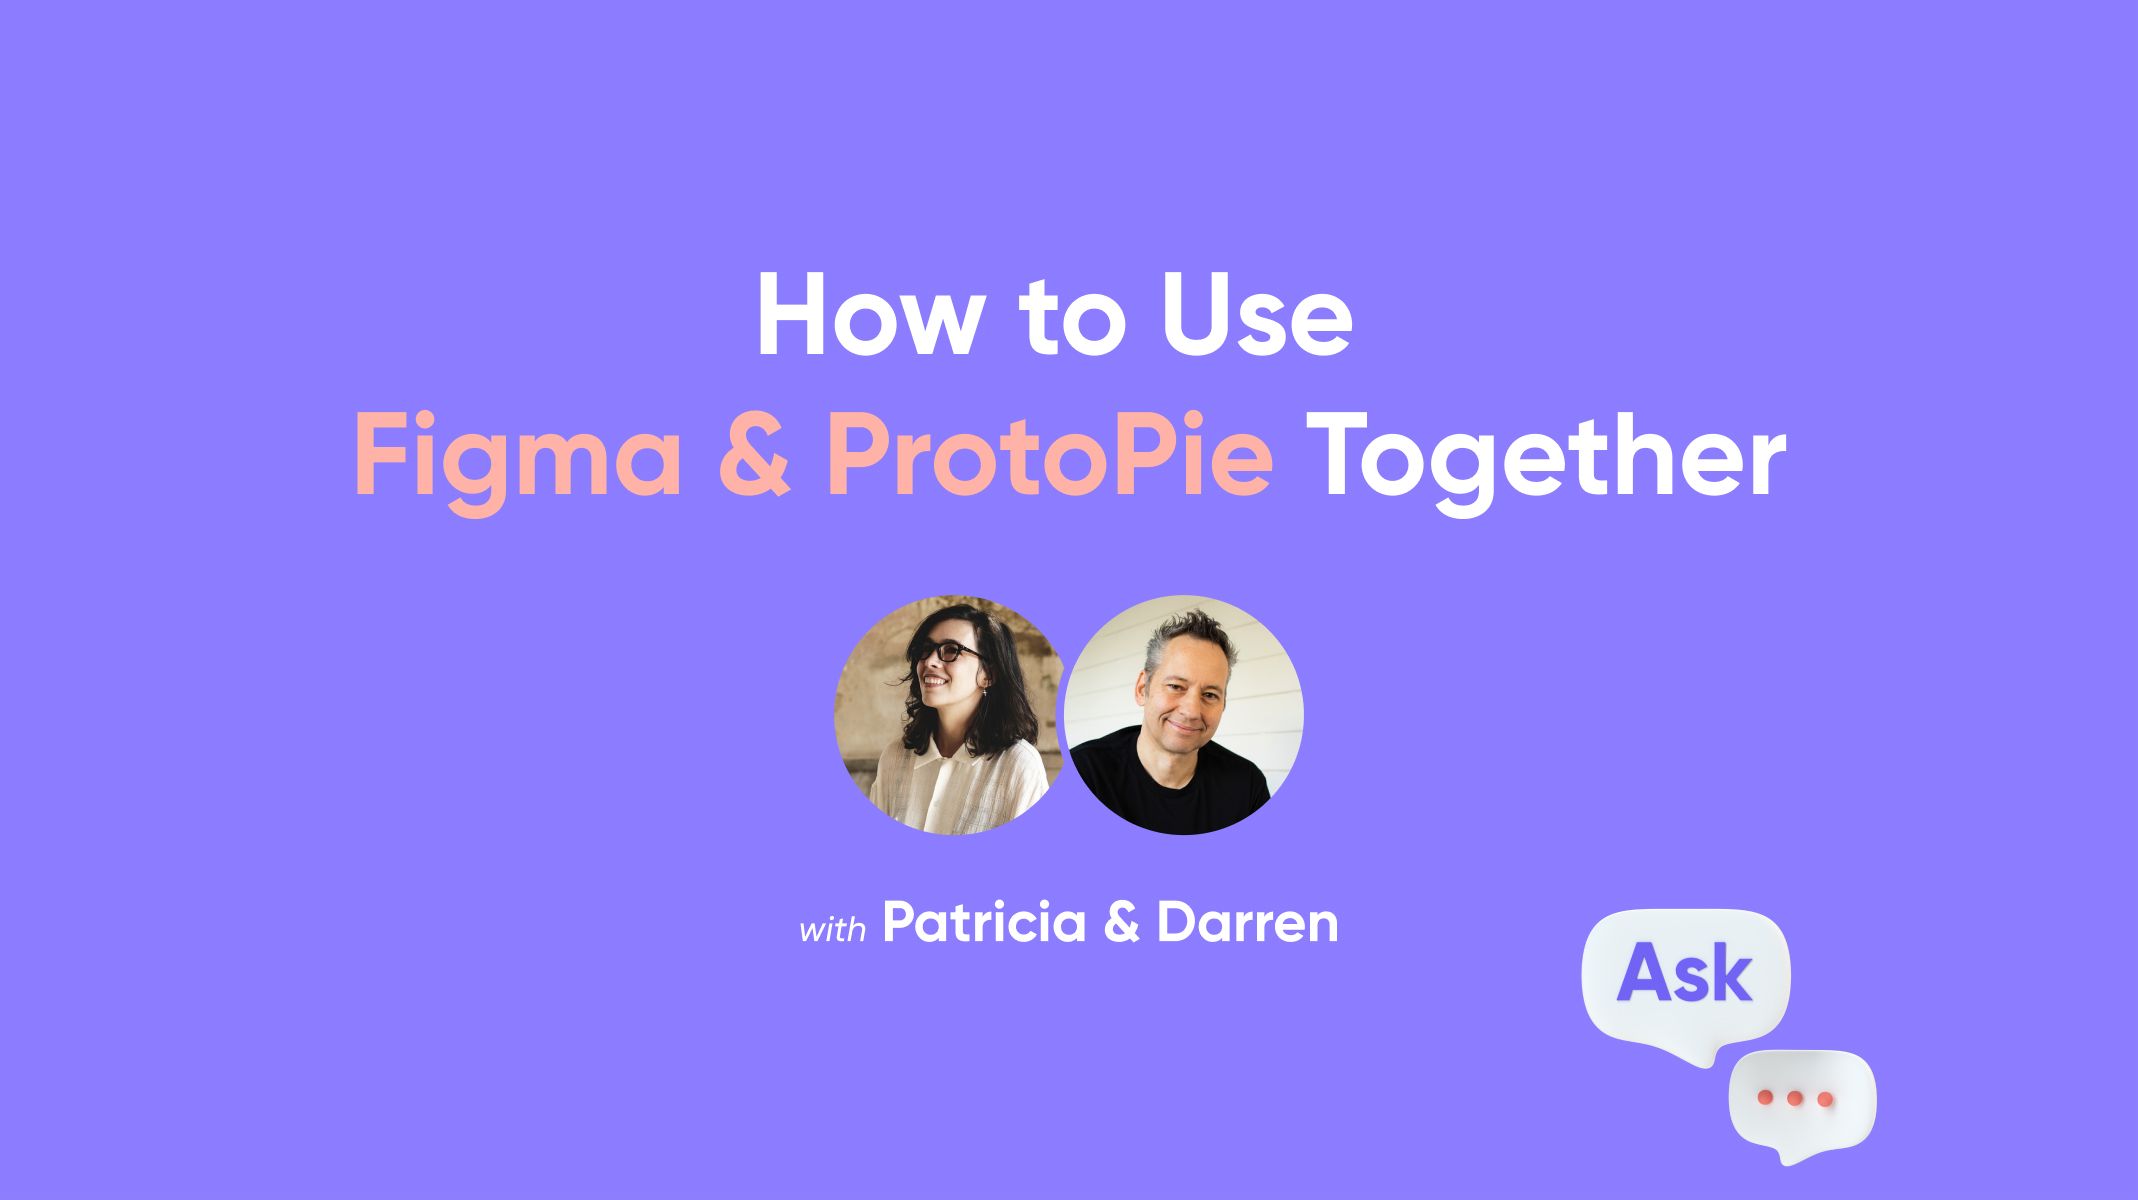 protopie ambassador darren bennett teaches you how to use figma and protopie together